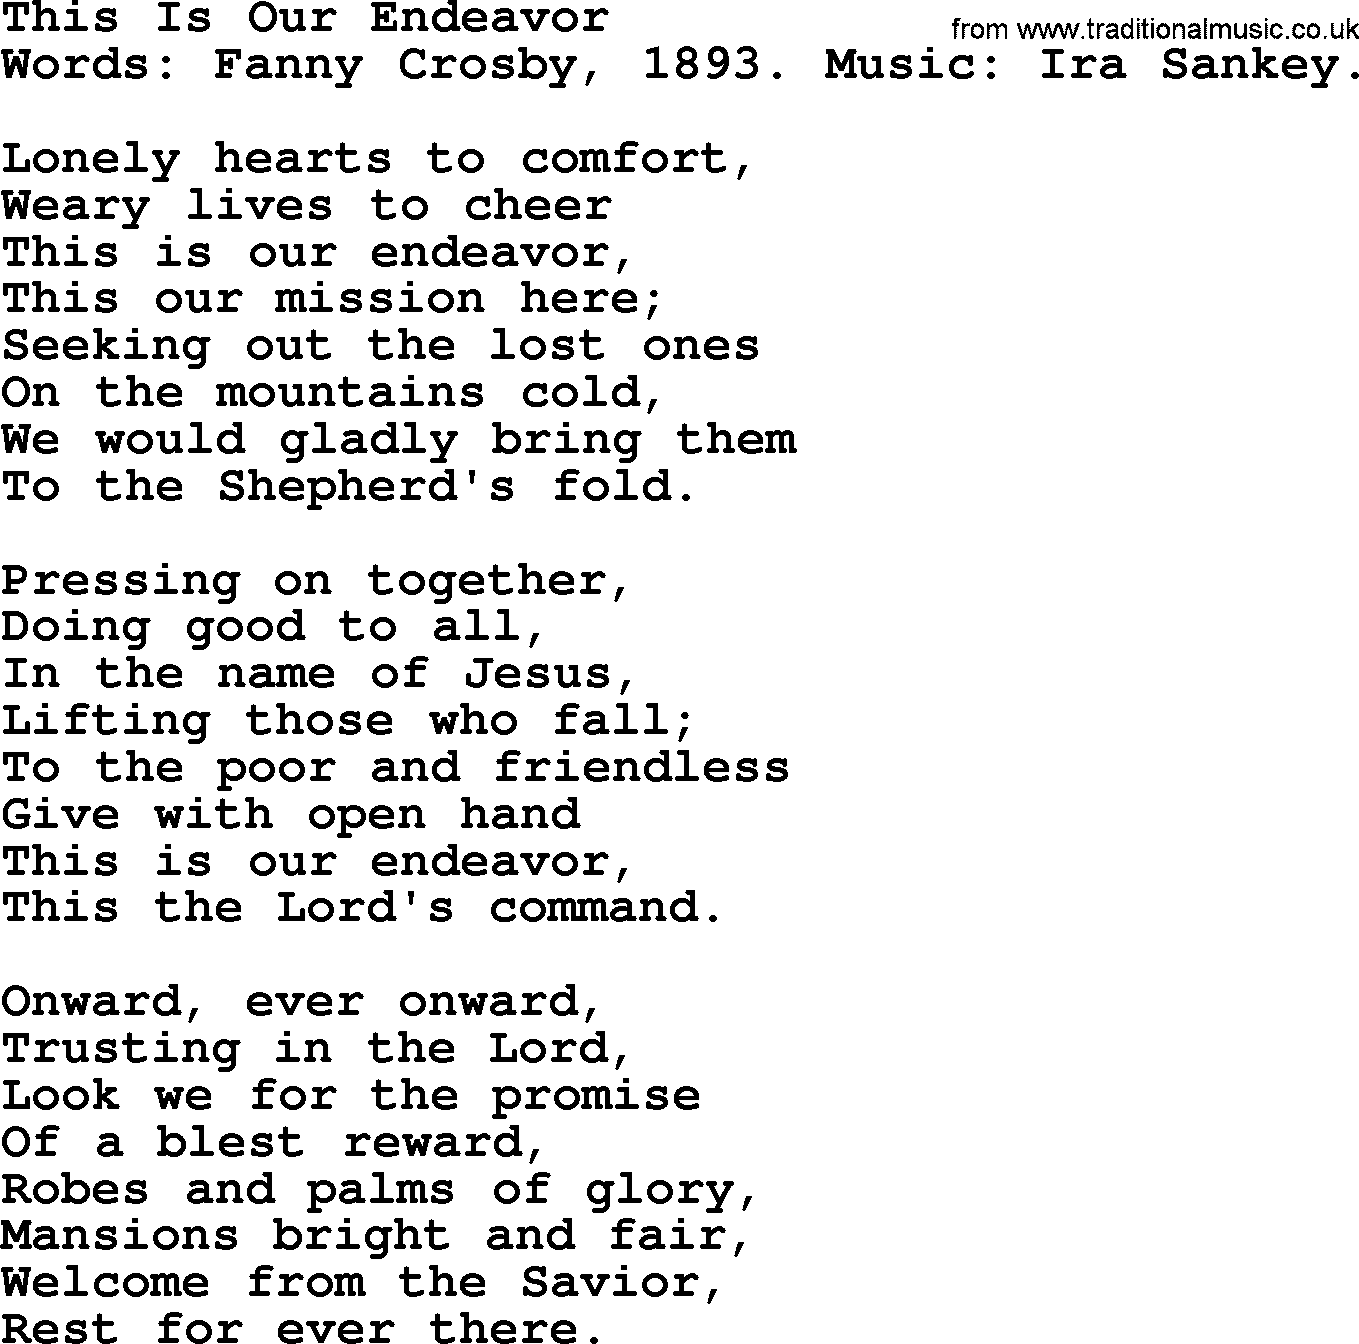 Fanny Crosby song: This Is Our Endeavor, lyrics